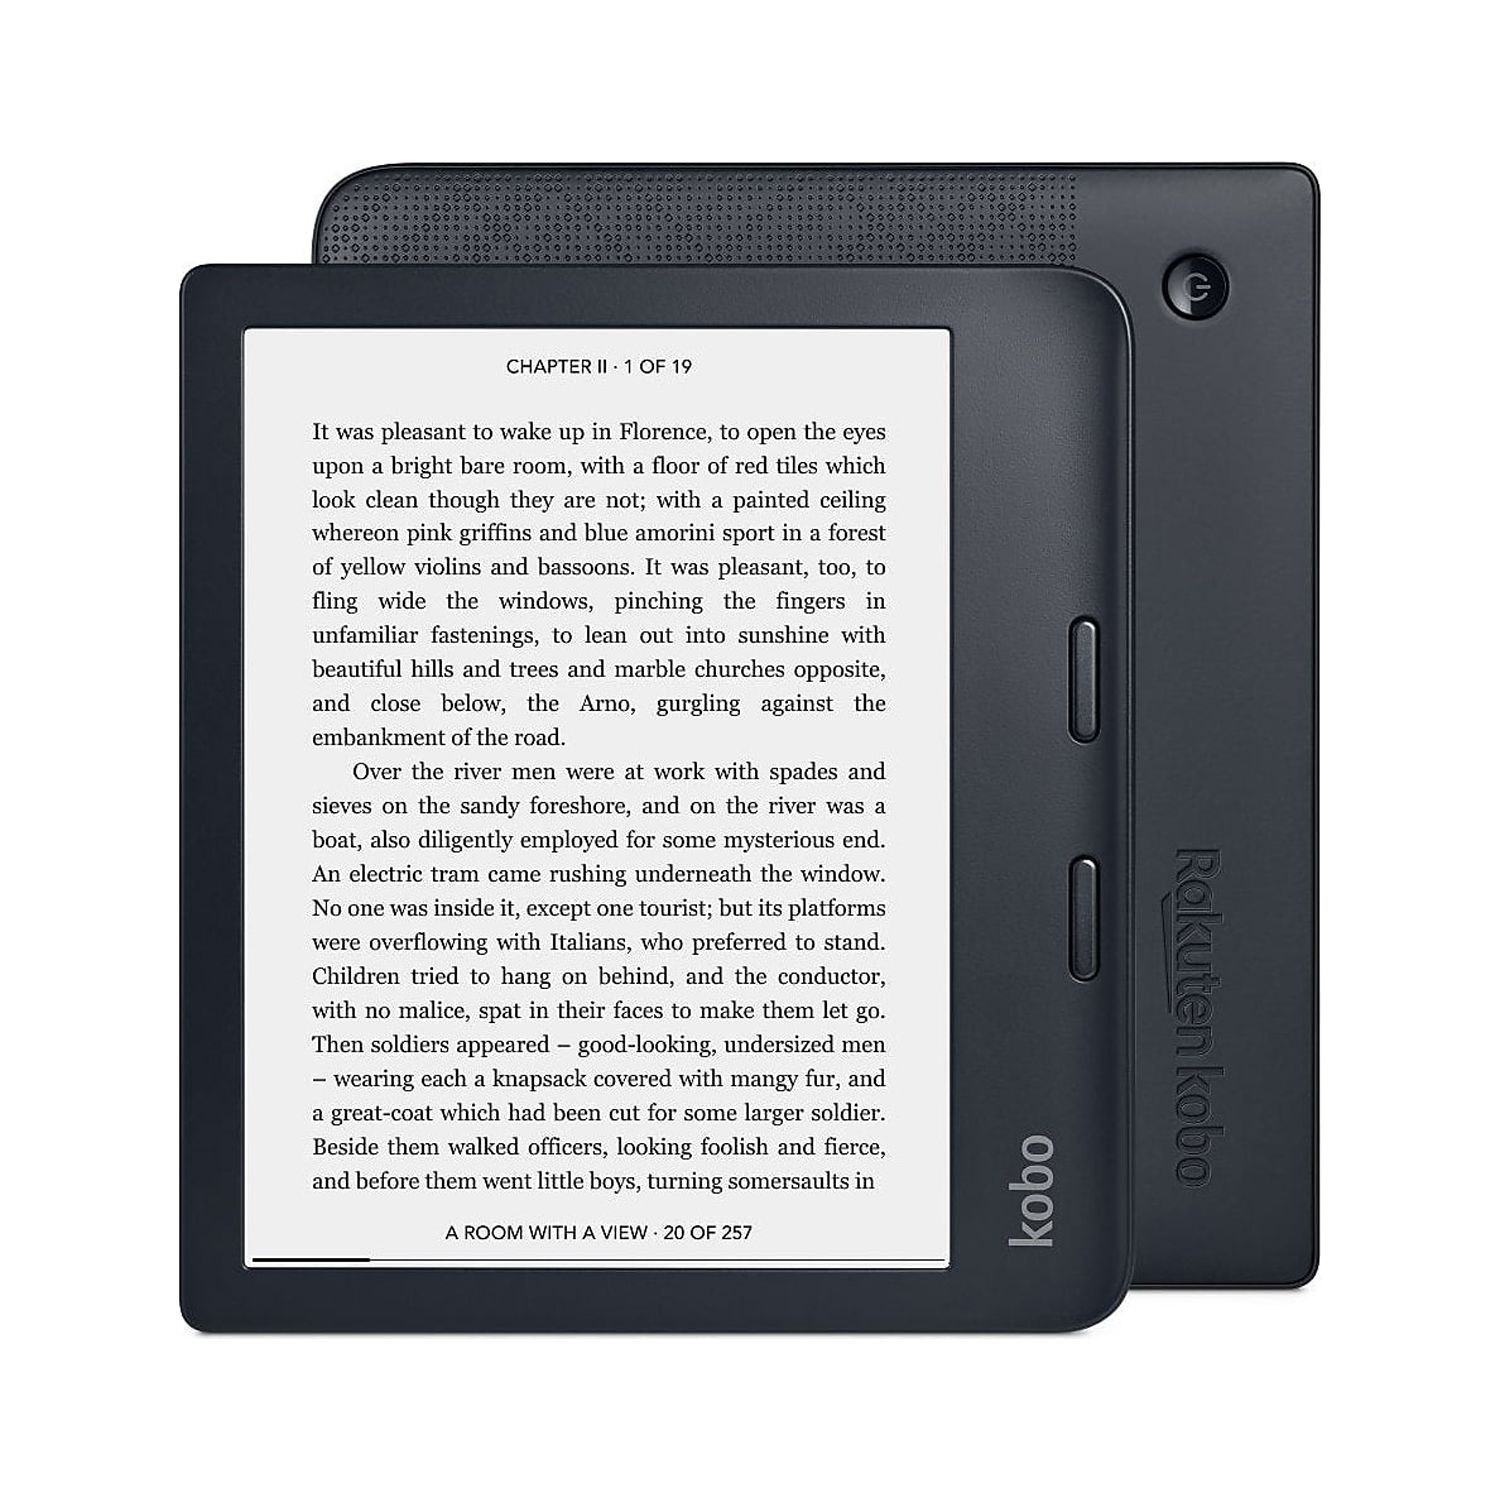 Kobo Libra 2 | eReader | 7? Glare Free Touchscreen | Waterproof | Adjustable Brightness and Color Temperature | Blue Light Reduction | eBooks | WiFi | 32GB of Storage | Carta E Ink Technology | Black - image 3 of 5